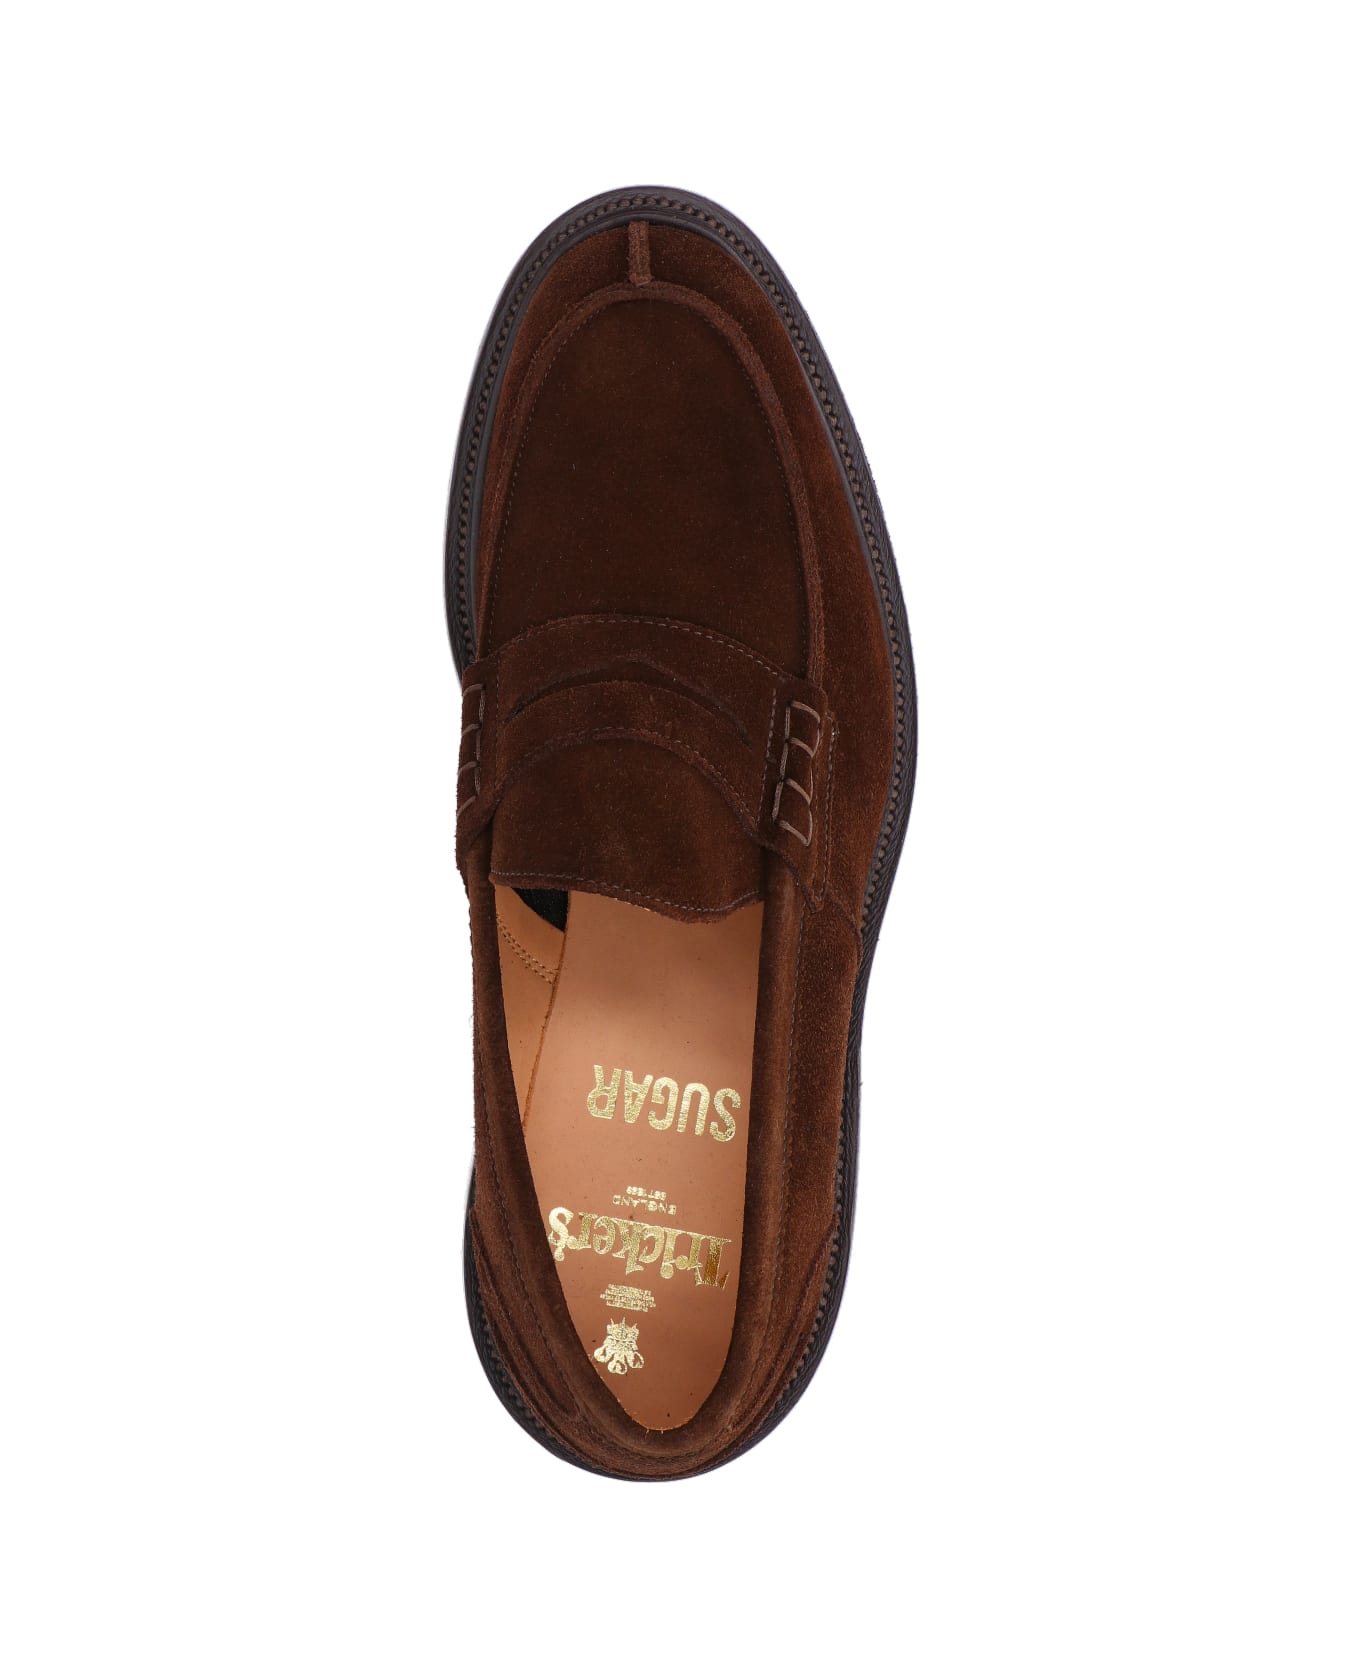 Tricker's 'james Penny' Loafers - Brown